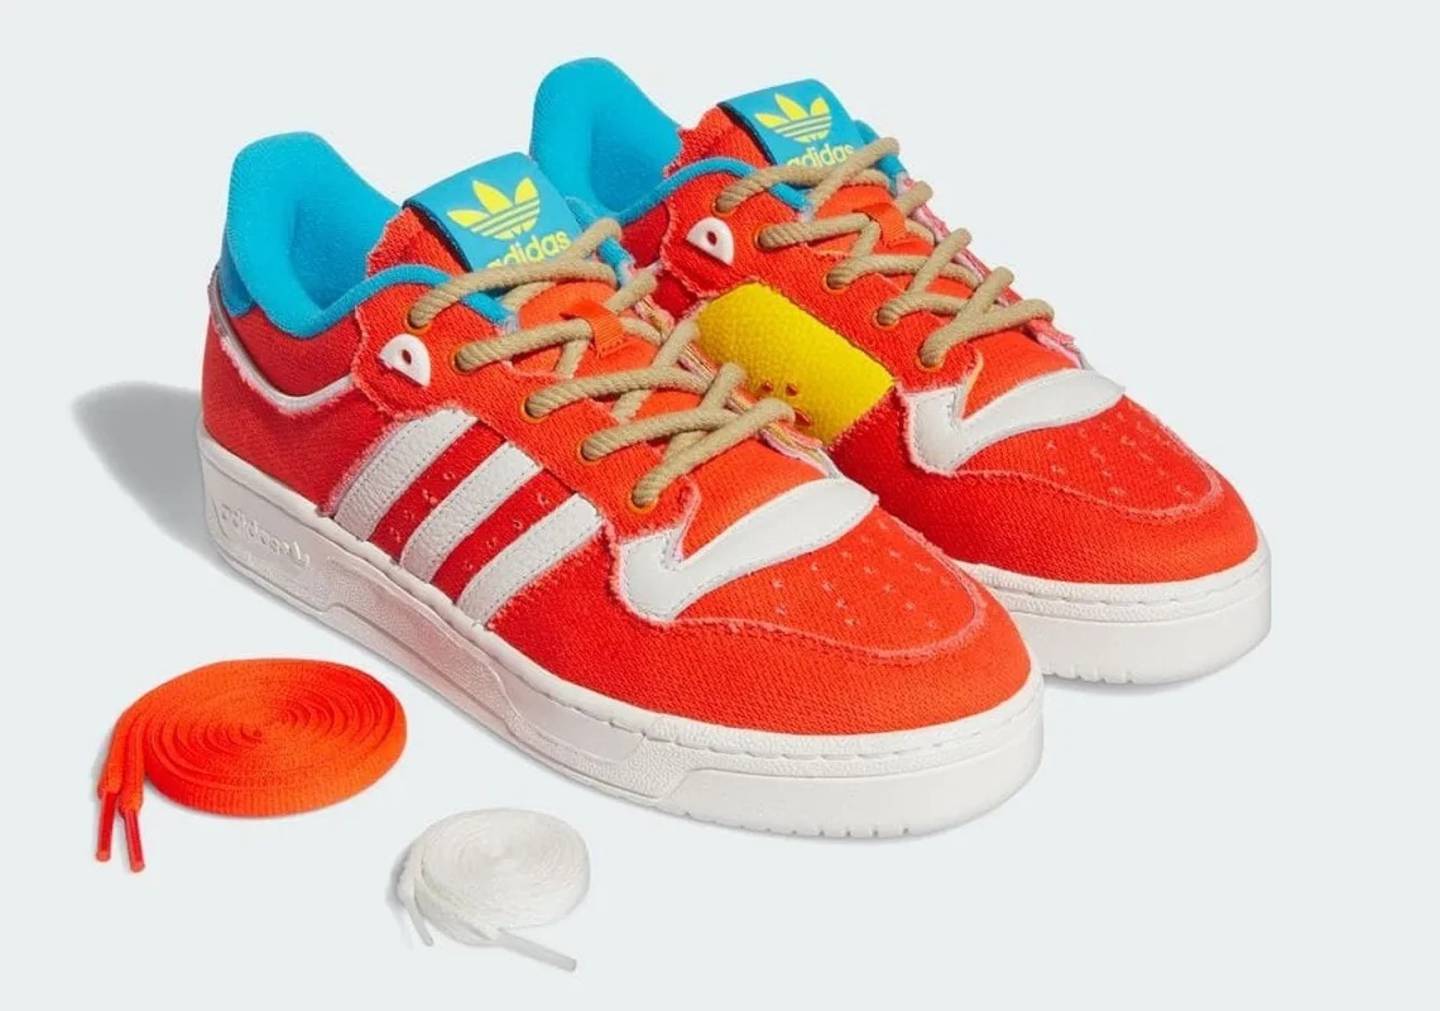 The Simpsons x Adidas Rivalry Low '86 Treehouse of Horrors